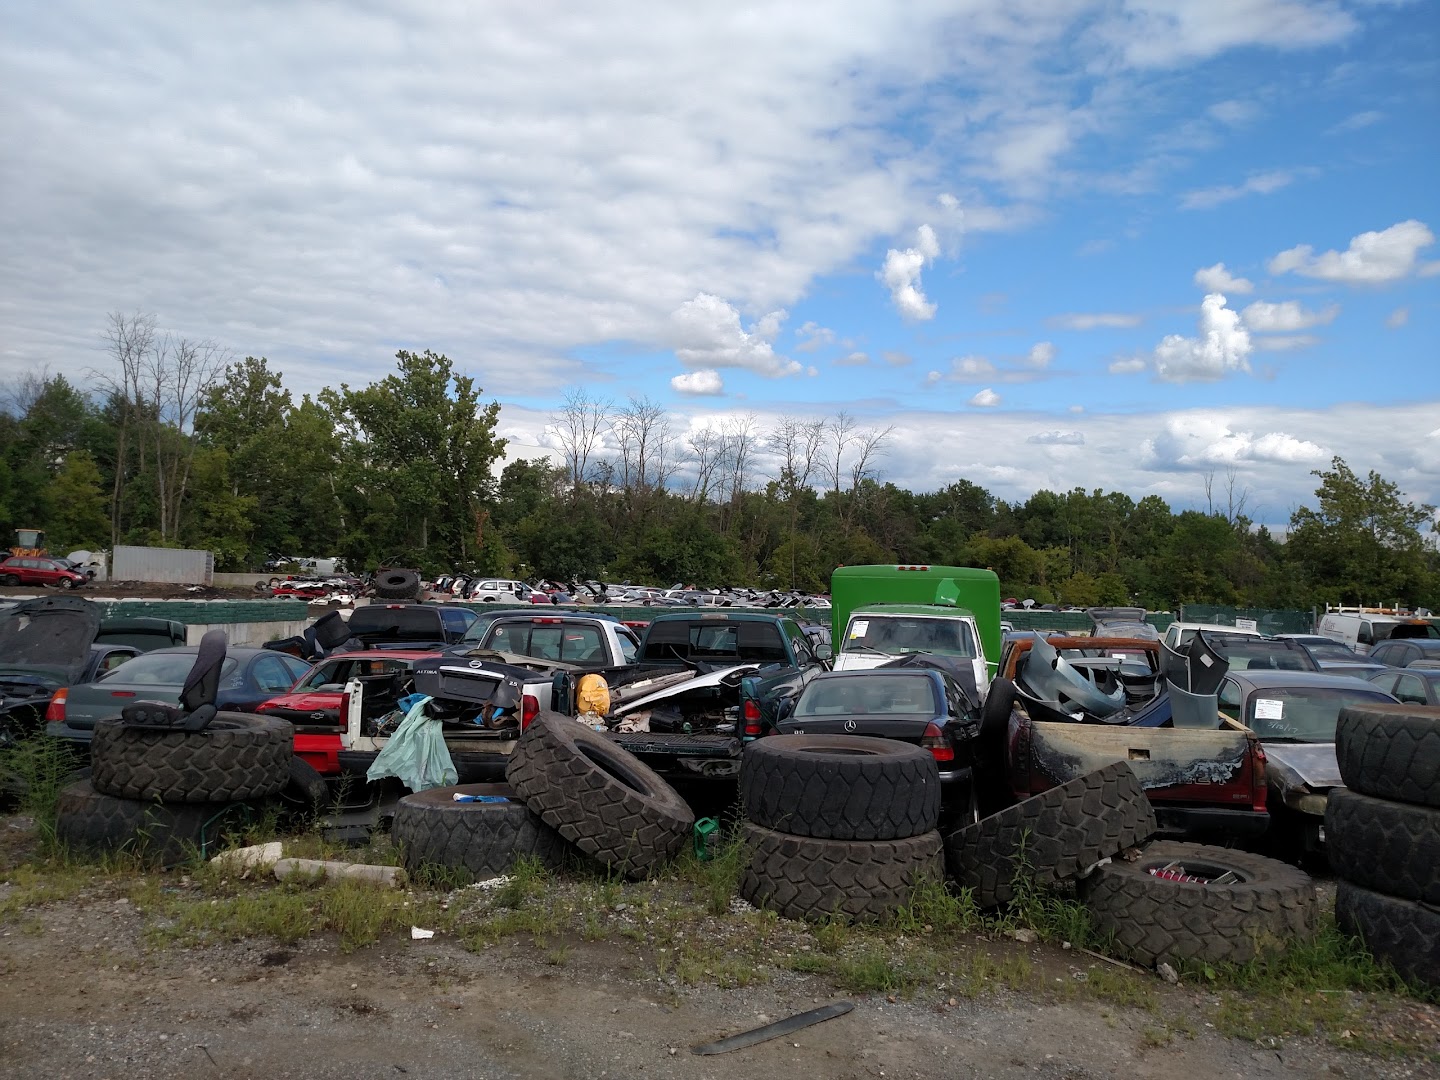 Salvage yard In Jessup MD 